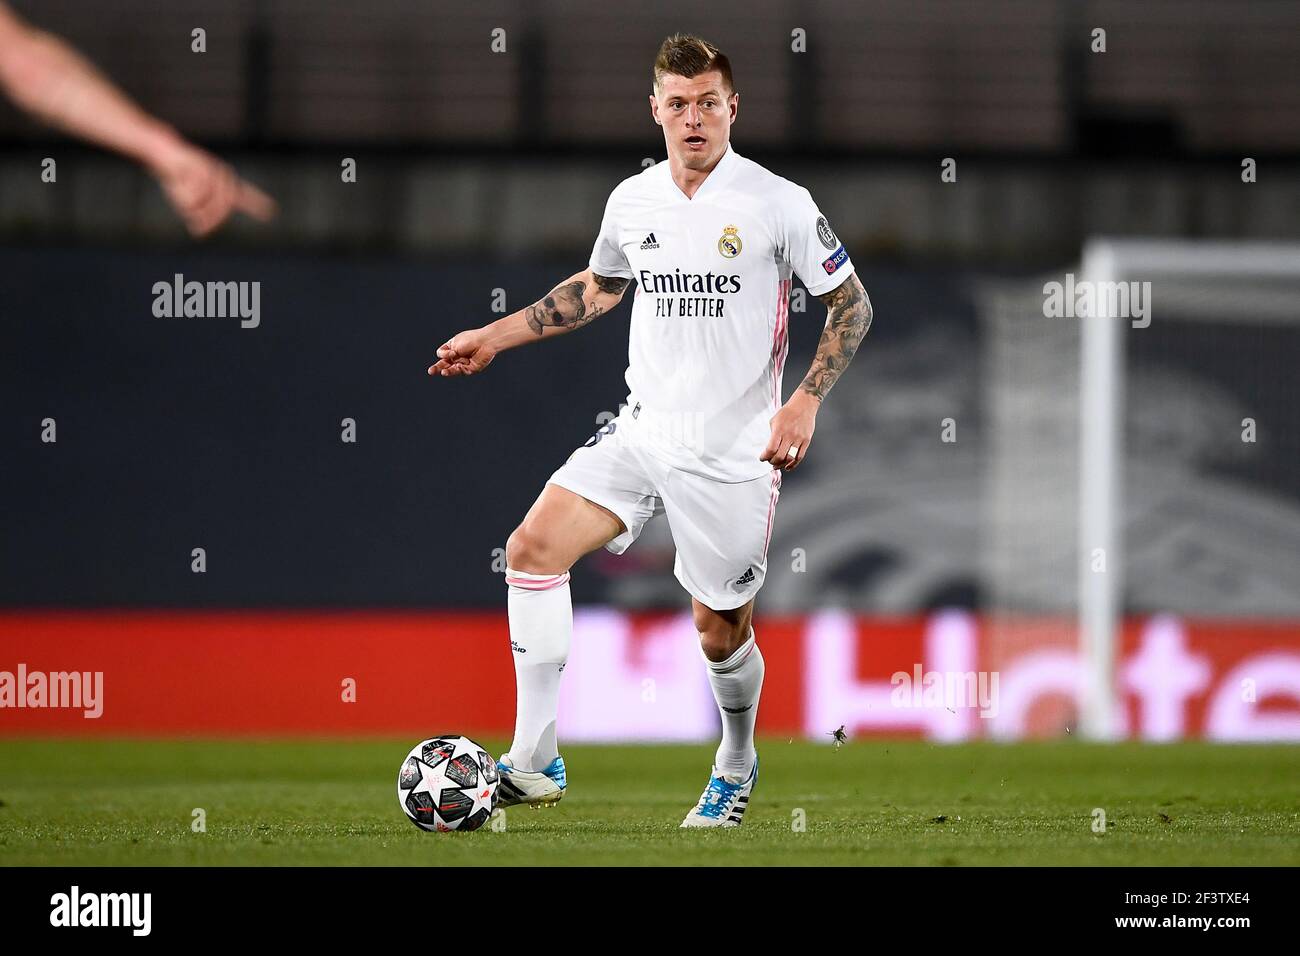 Madrid, Spain - 16 March, 2021: Toni Kroos of Real Madrid CF in action during the UEFA Champions League Round of 16 second leg football match between Real Madrid CF and Atalanta BC. Real Madrid CF won 3-1 over Atalanta BC. Credit: Nicolò Campo/Alamy Live News Stock Photo